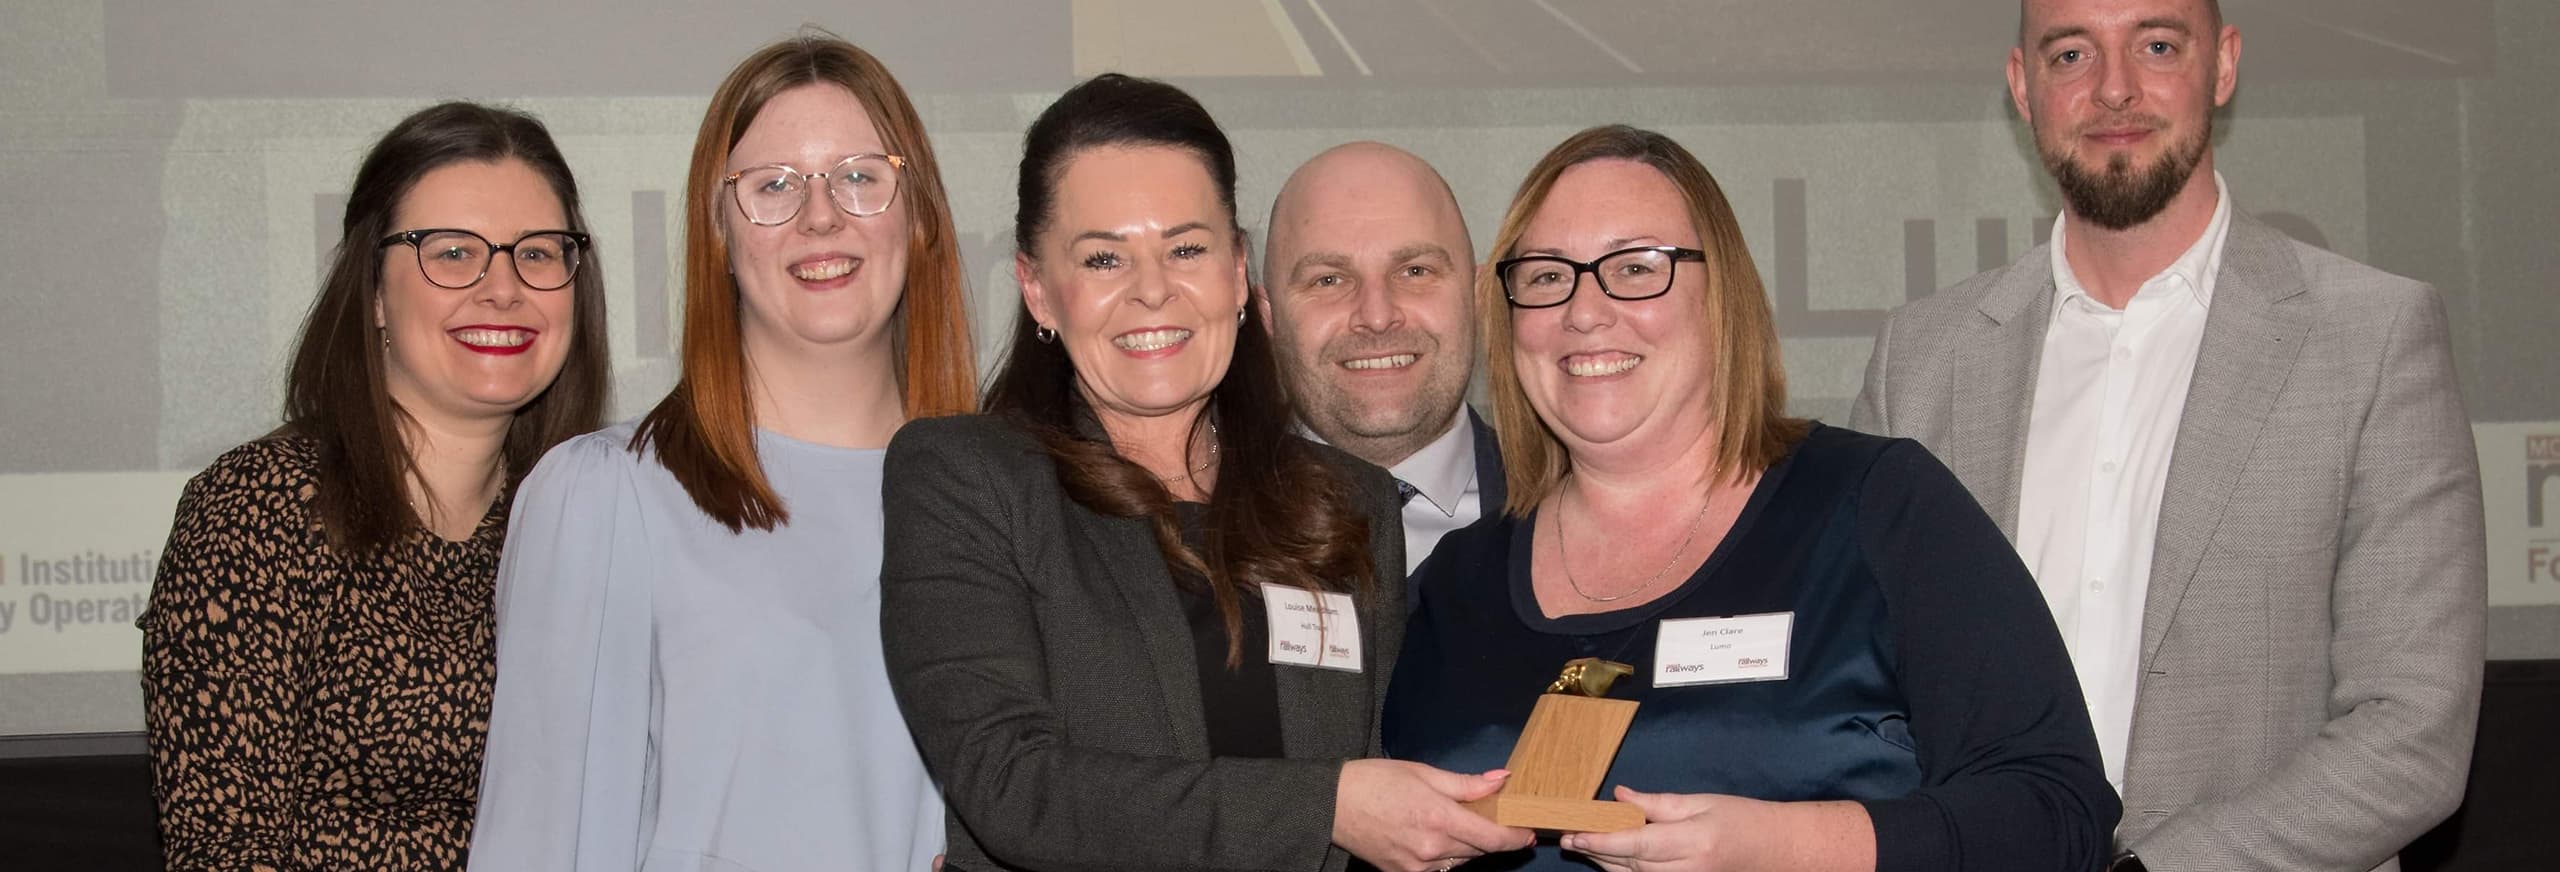 Hull Trains colleagues at the Golden Whistle Awards with their gold award